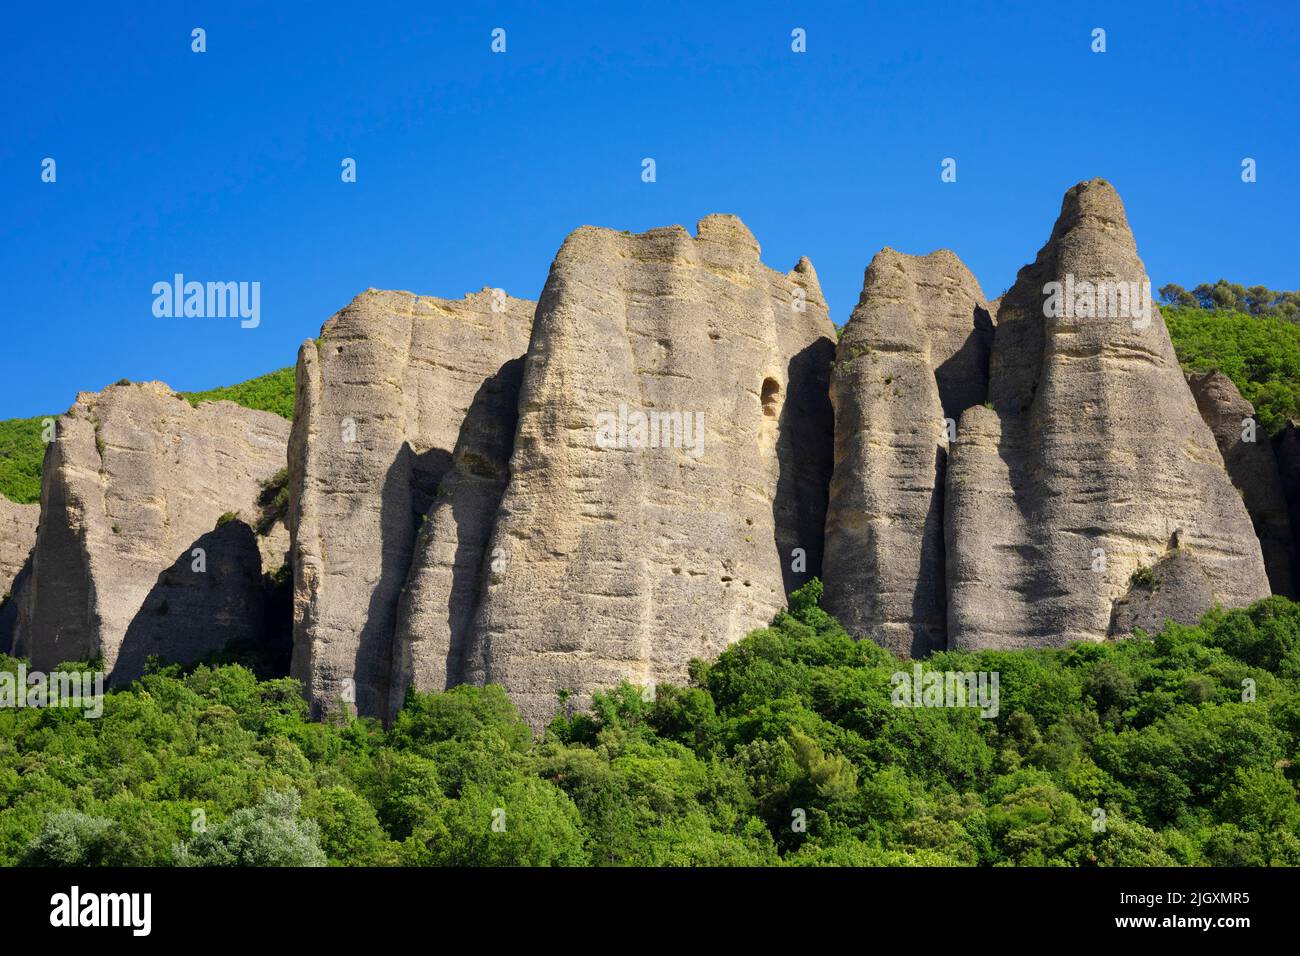 View of Les Mees, famous geological site in France, Europe Stock Photo